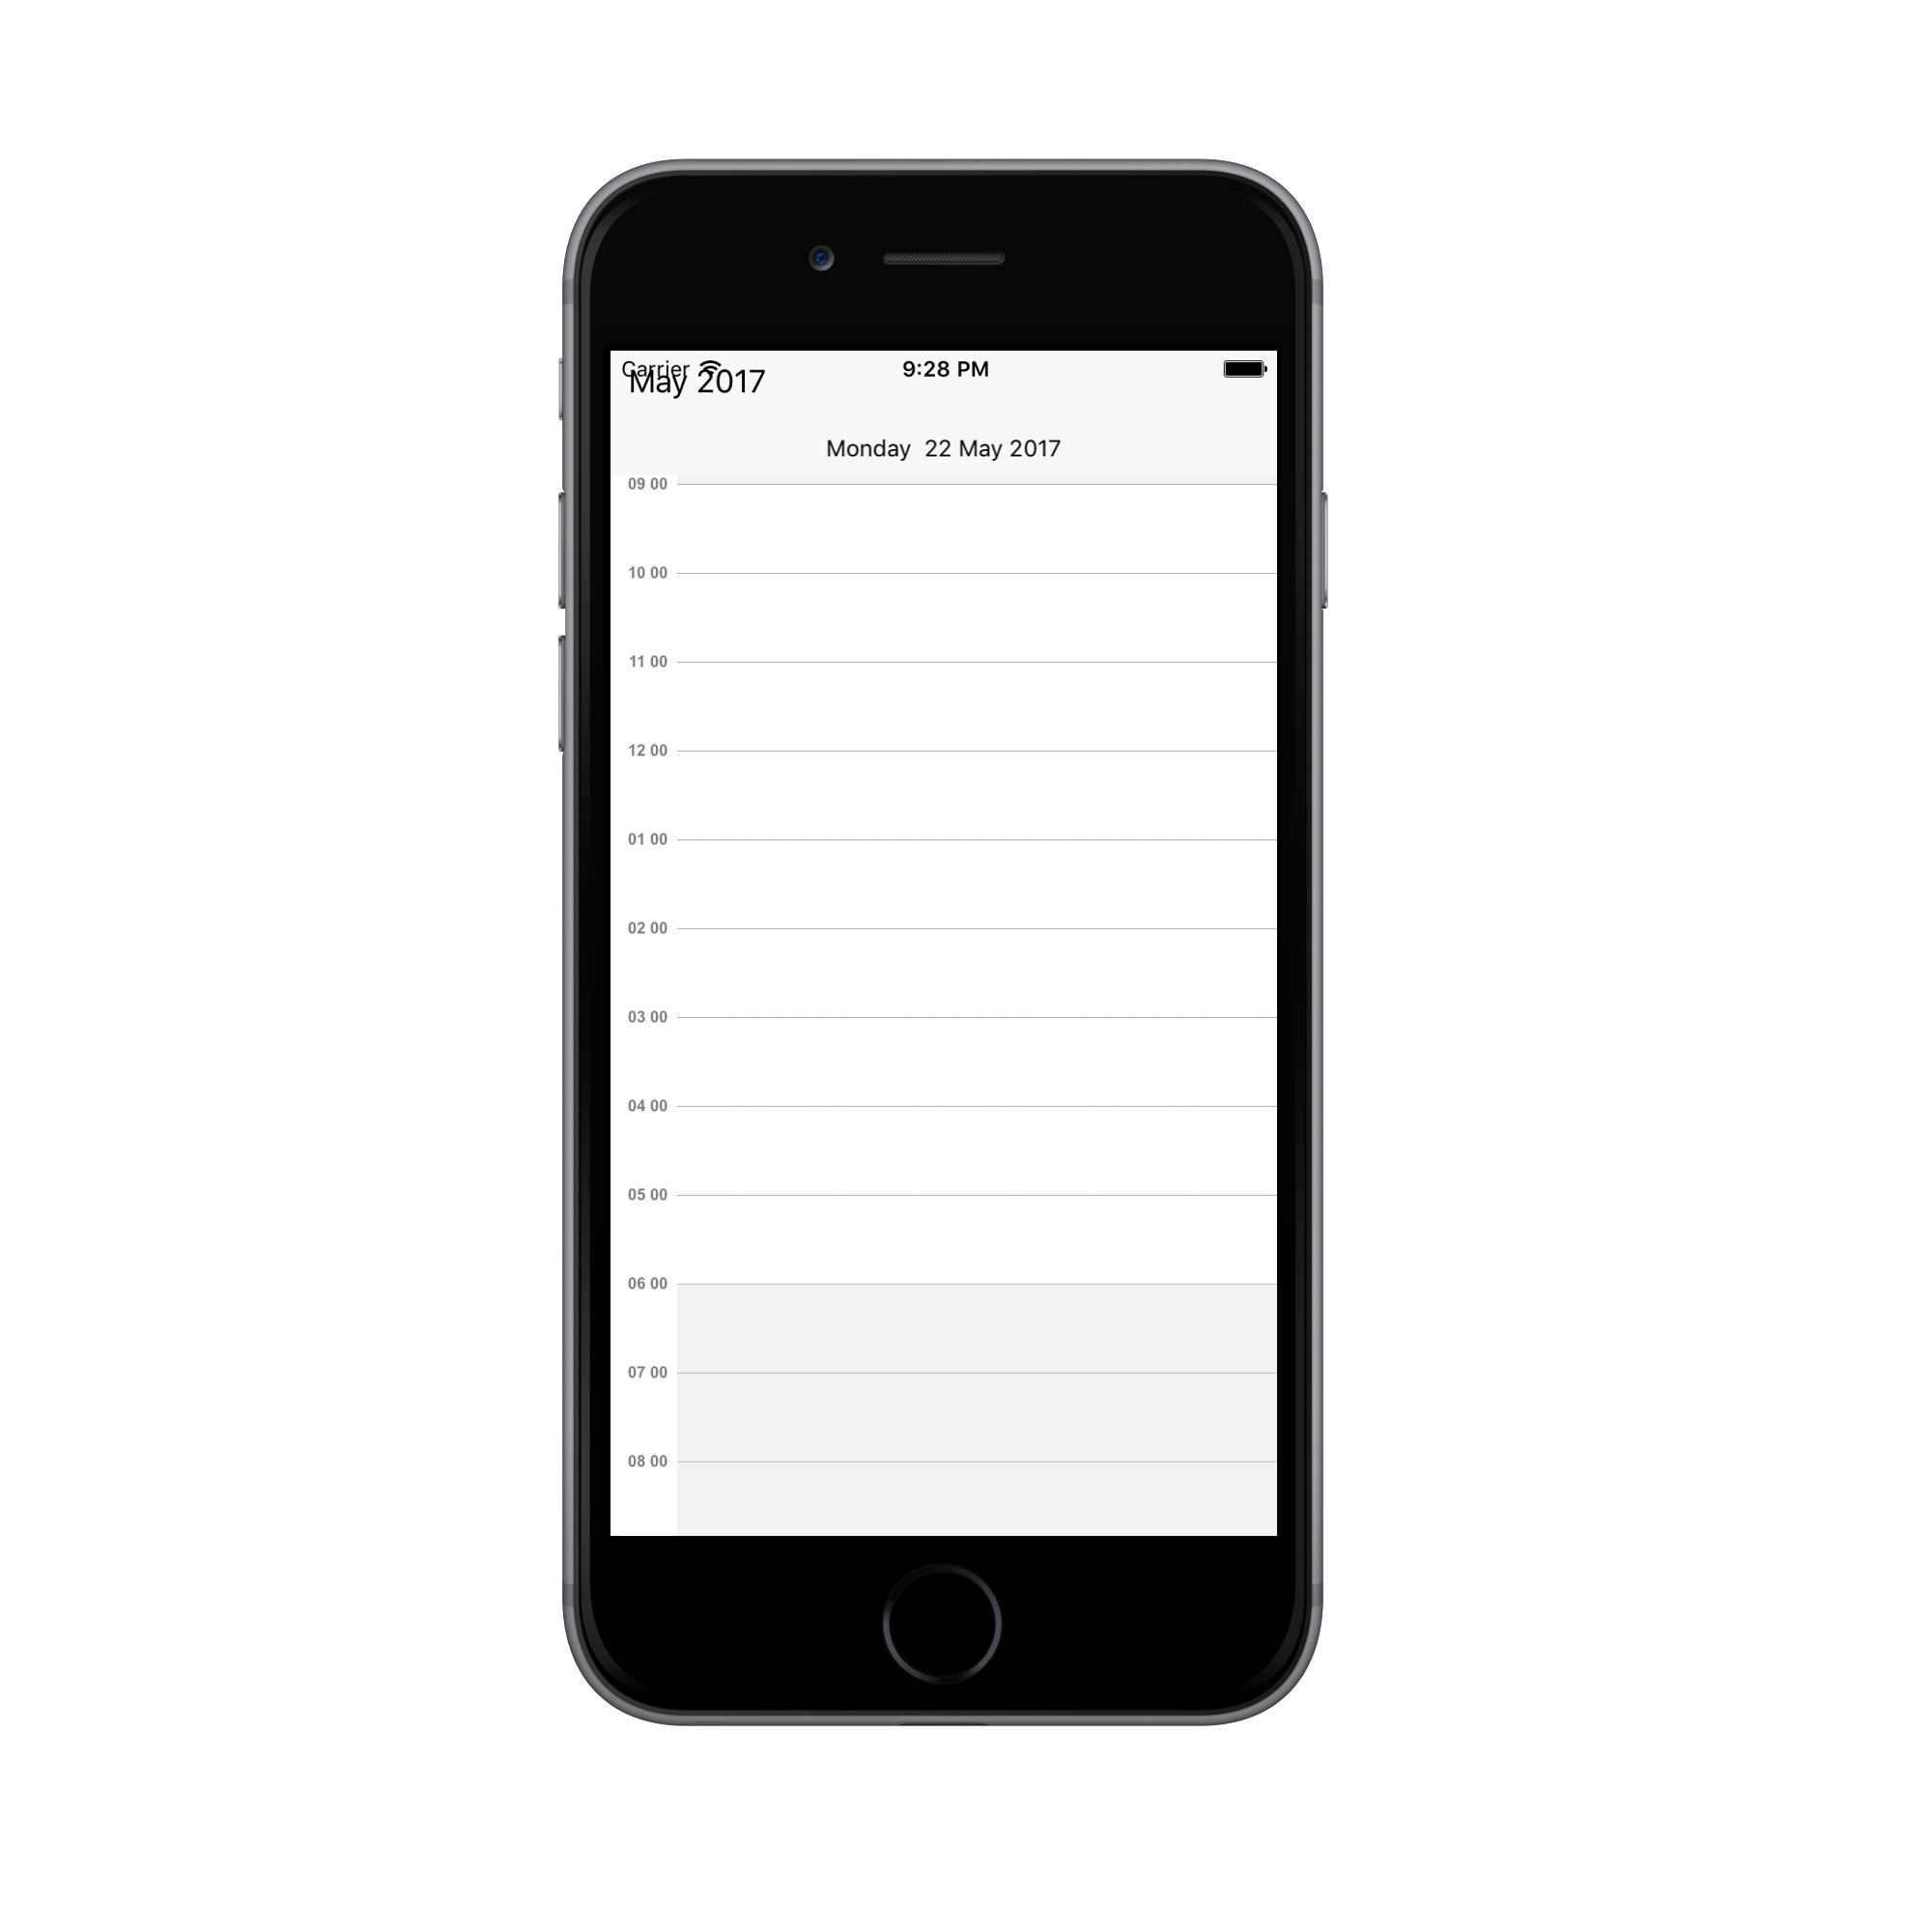 Day view time label customization for schedule in Xamarin.iOS